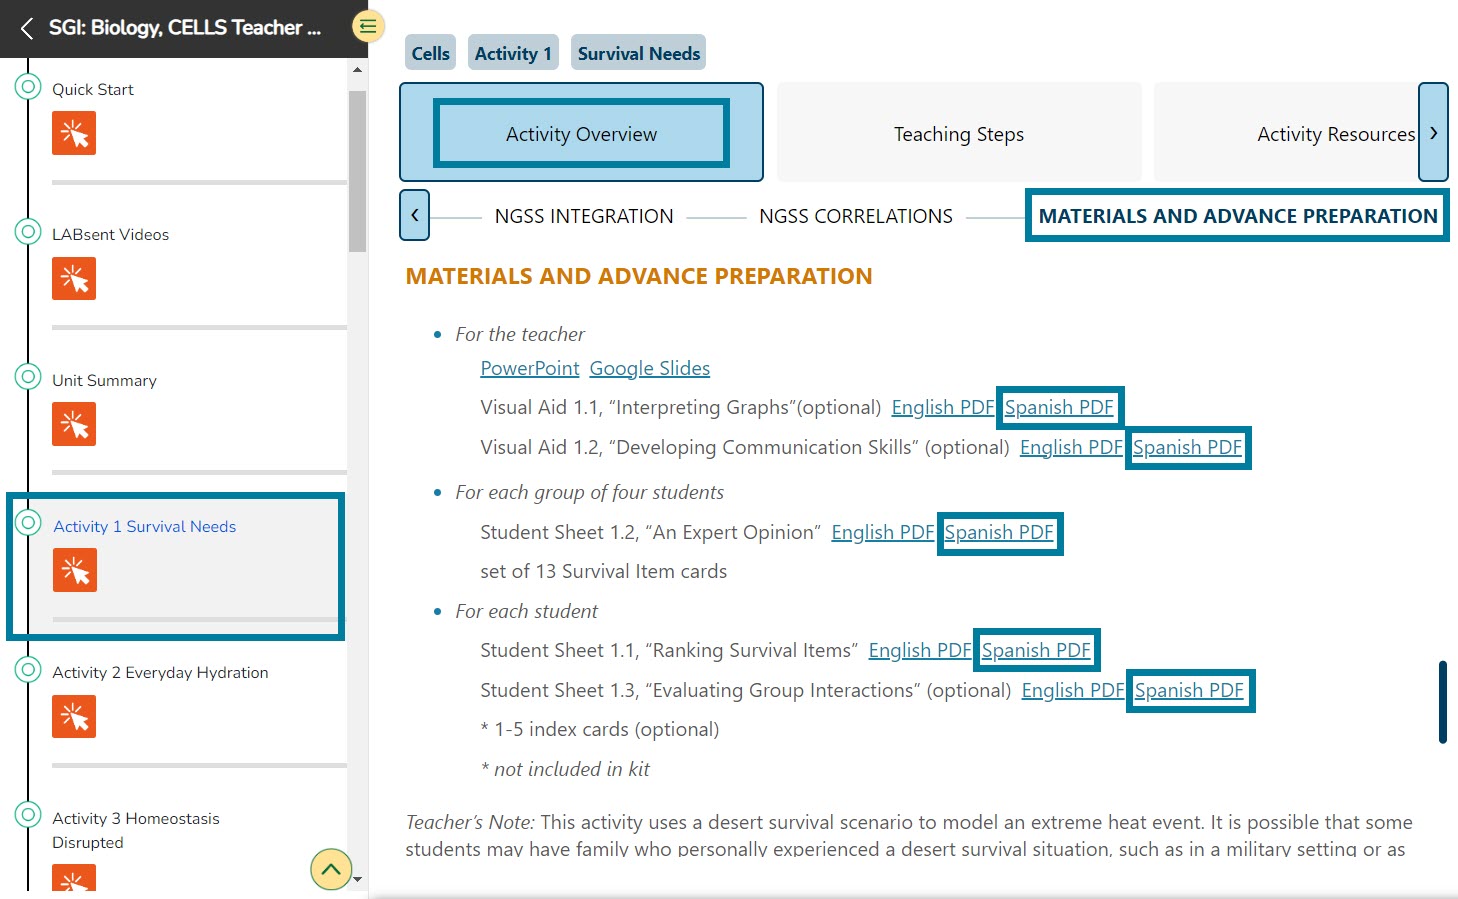 From within an activity, the Activity Overview > Materials and Advanced Preparation section will have Spanish resources hyperlinked "Spanish PDF" next to their English hyperlinks.